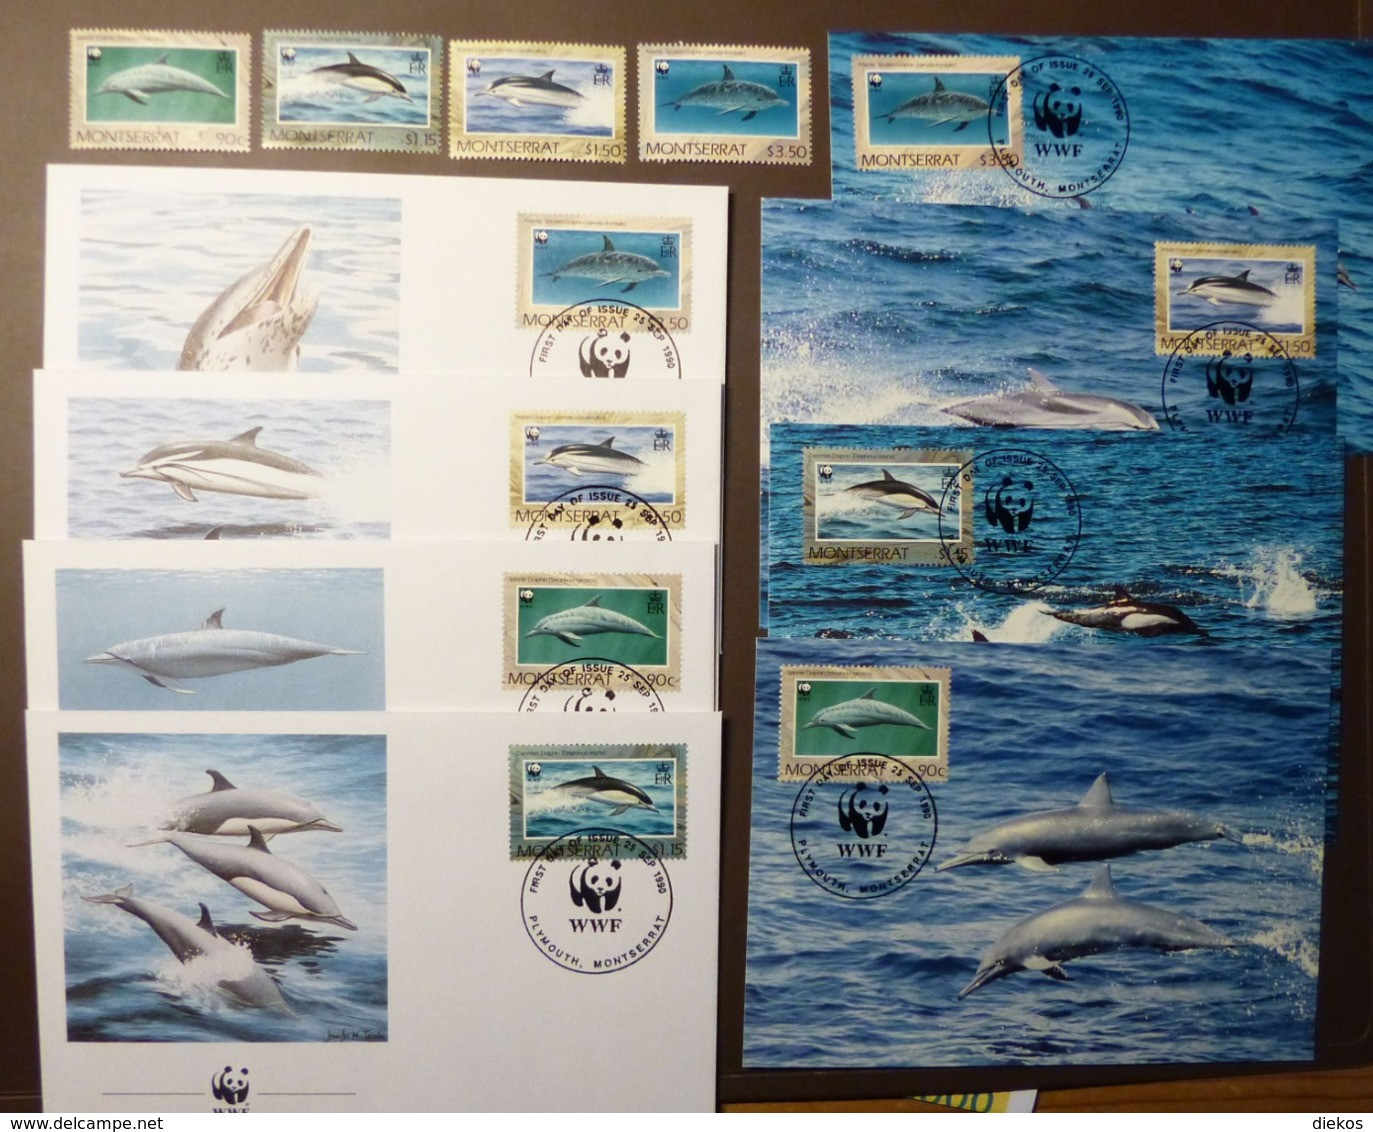 WWF  MONTSERRAT  DOLPHINS  DELFINI  MARINE LIFE  1990 Maxi Card FDC MNH ** #cover 4934 - Collections, Lots & Séries